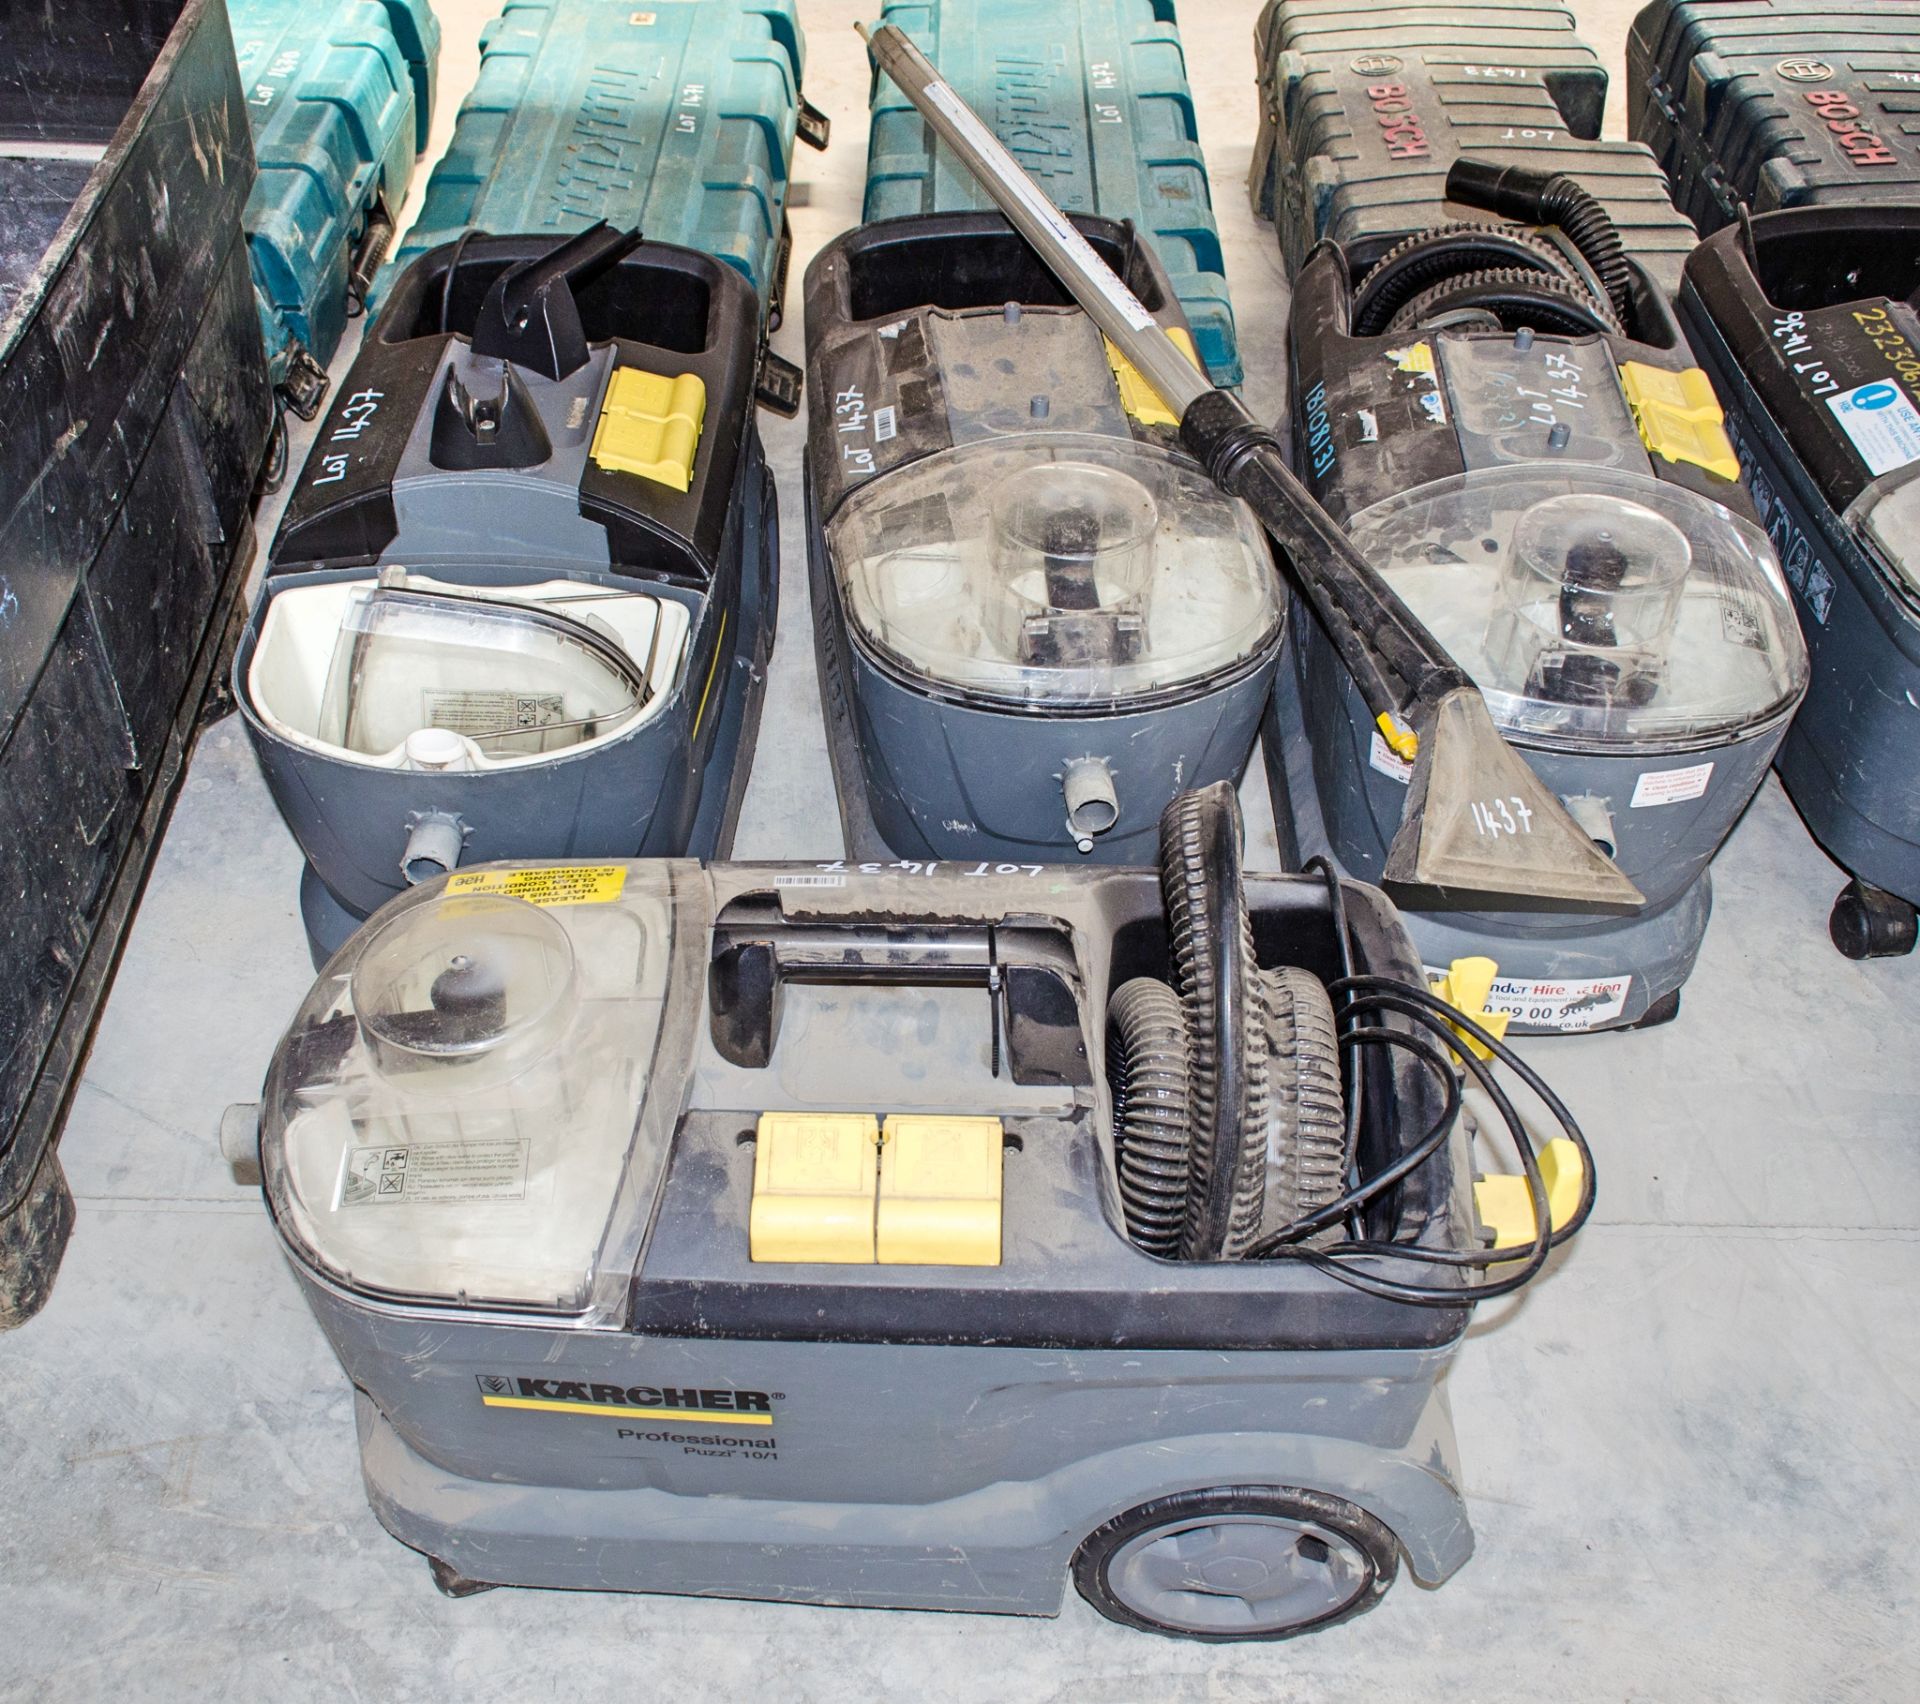 4 - Karcher 240v carpet cleaners ** All with parts missing **